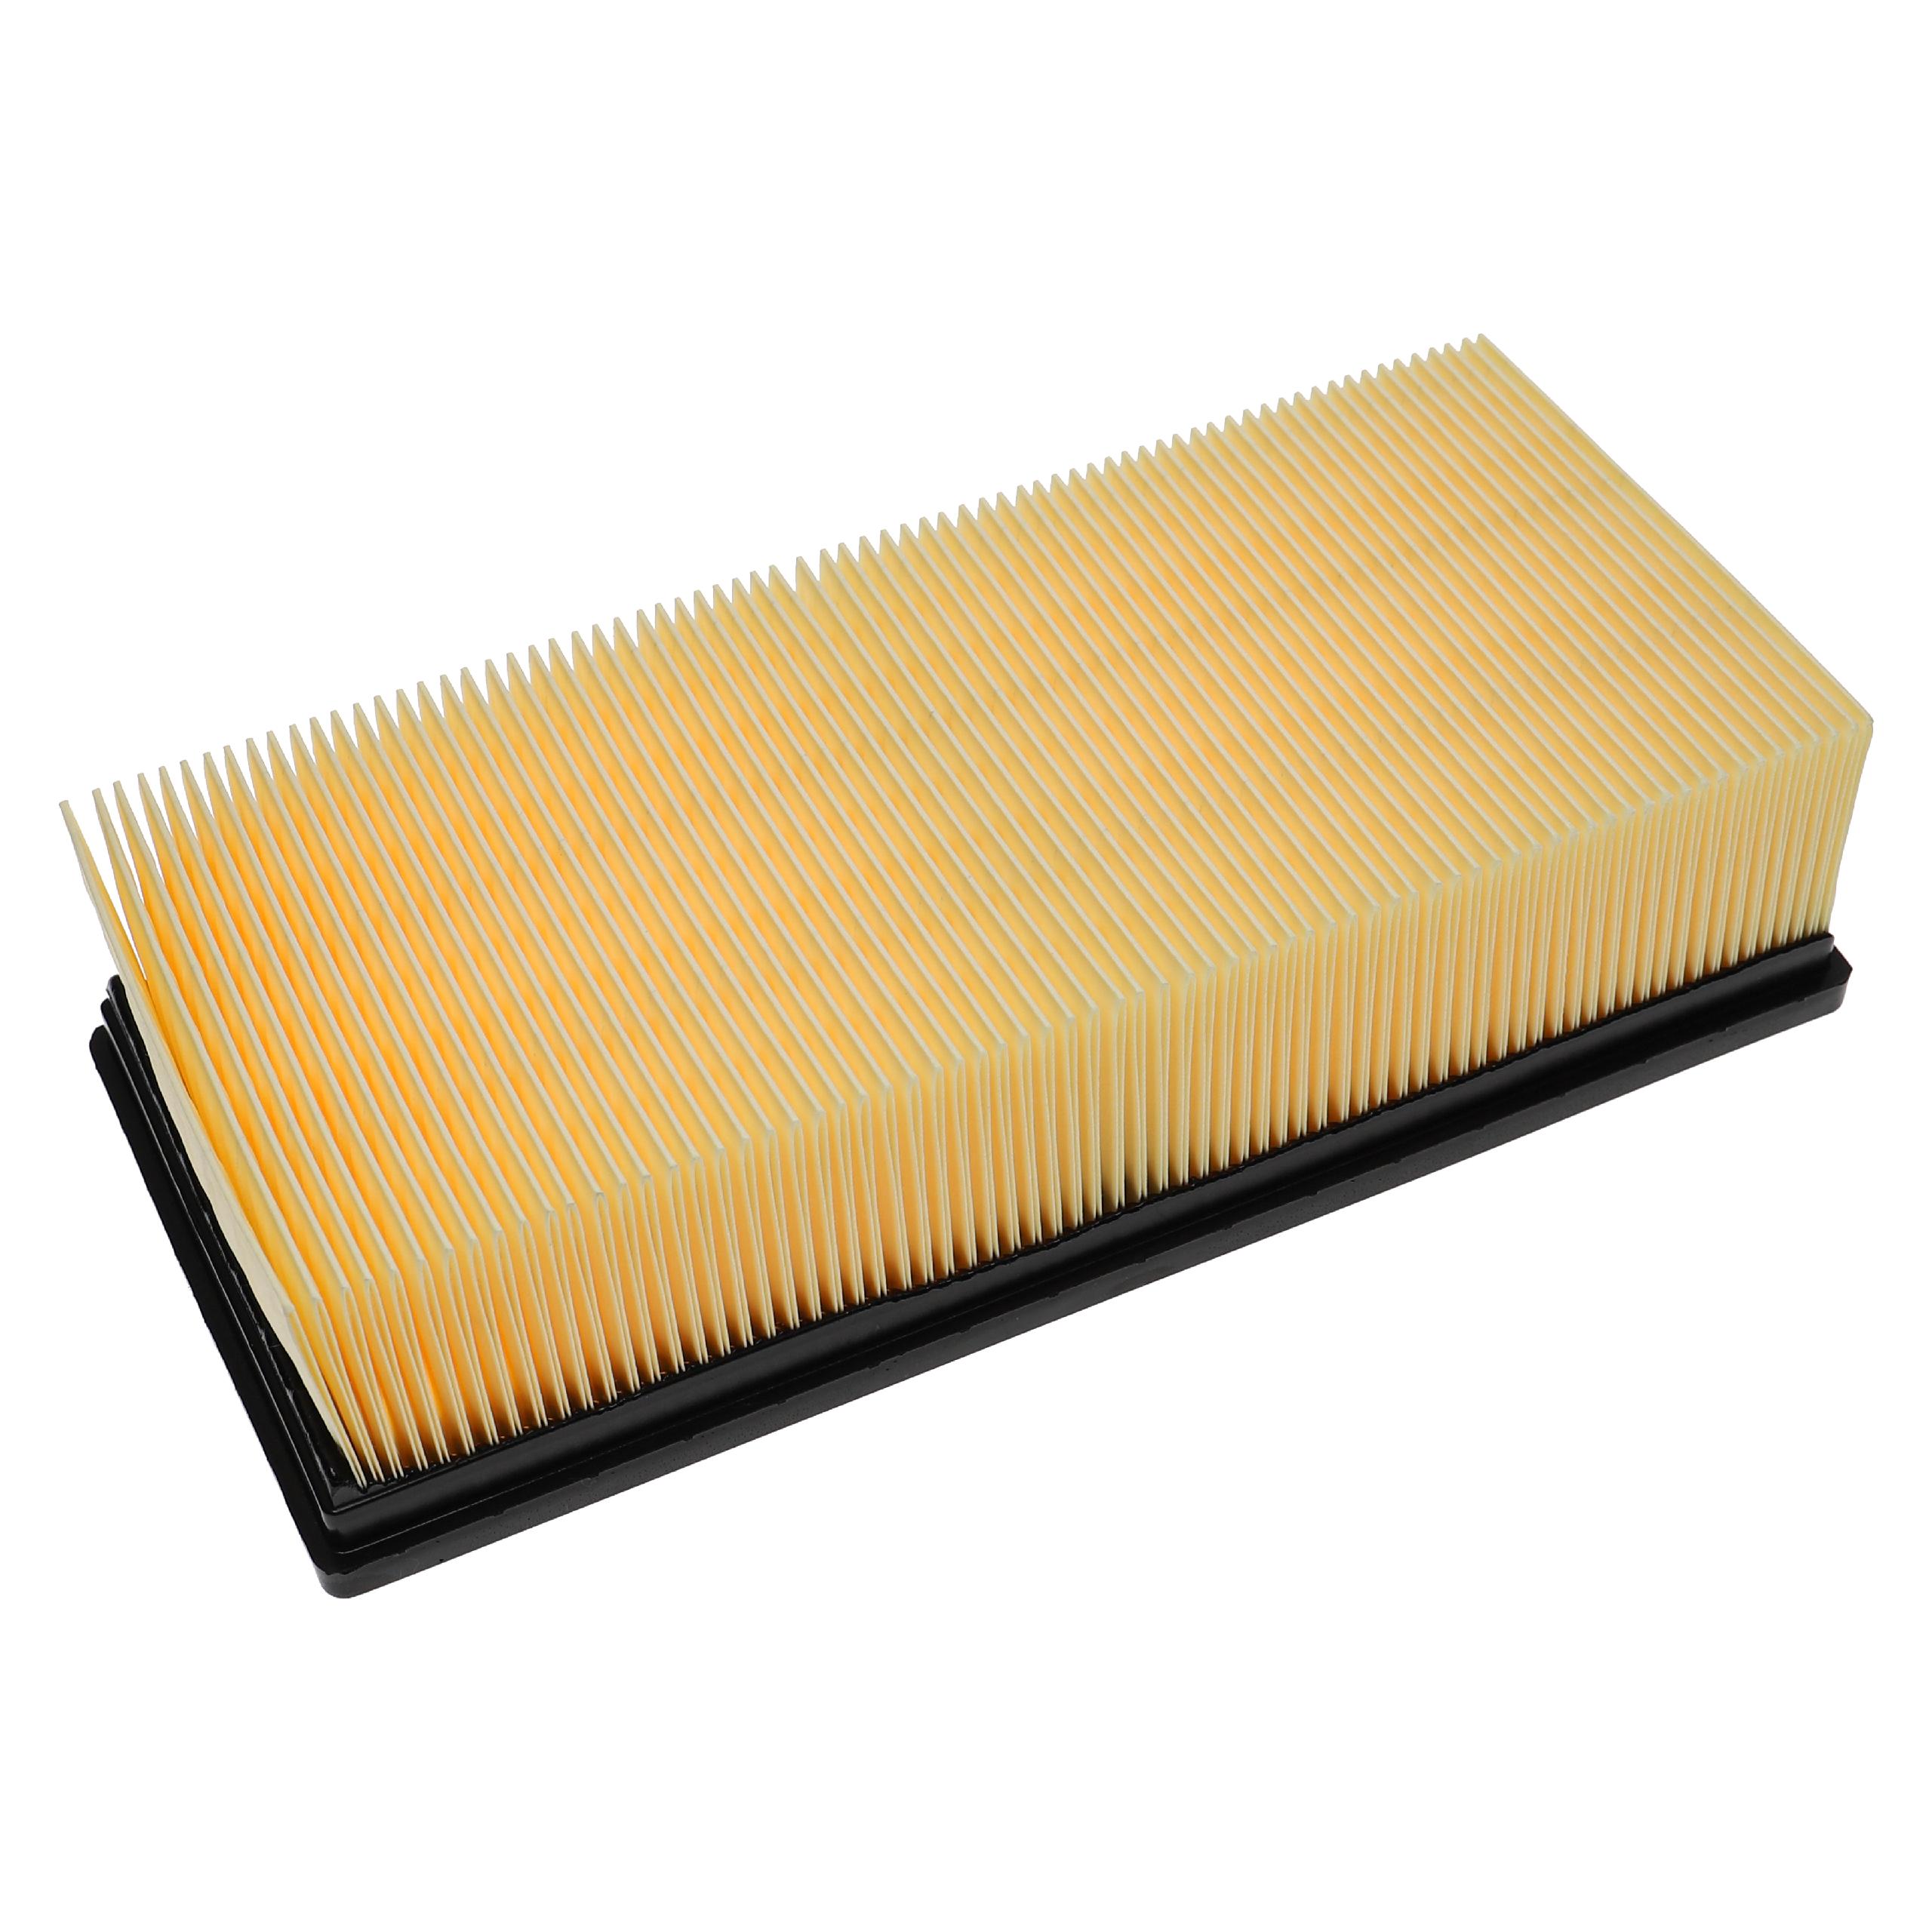 1x flat pleated filter replaces Kärcher 6.907-276.0 for KärcherVacuum Cleaner